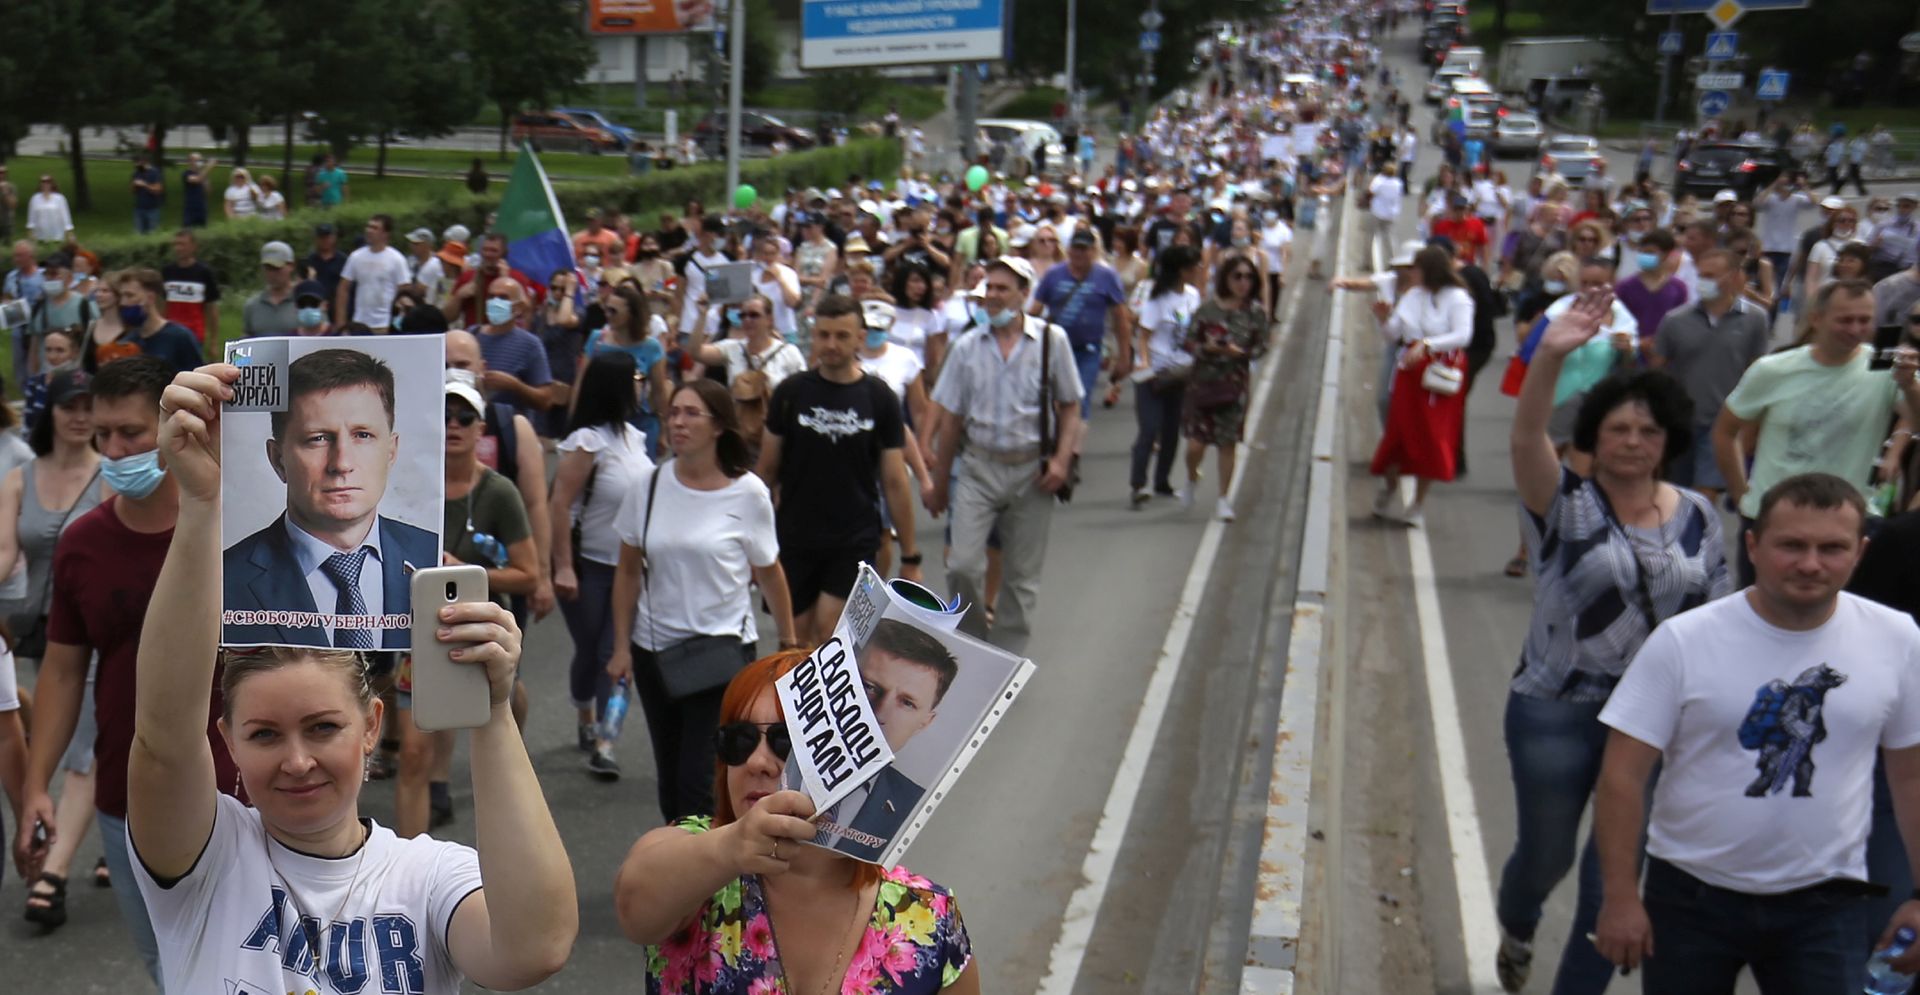 epa08565963 A woman holds a portrait of arrested governor of the Khabarovsk region Sergei Furgal, during a rally in his support in Khabarovsk, Russia, 25 July 2020. Sergei Furgal was arrested on 09 July 2020 suspected in organizing several contract killings of businessmen, his business partners in 2004-2005.  EPA/ALEKSANDR KOLBIN